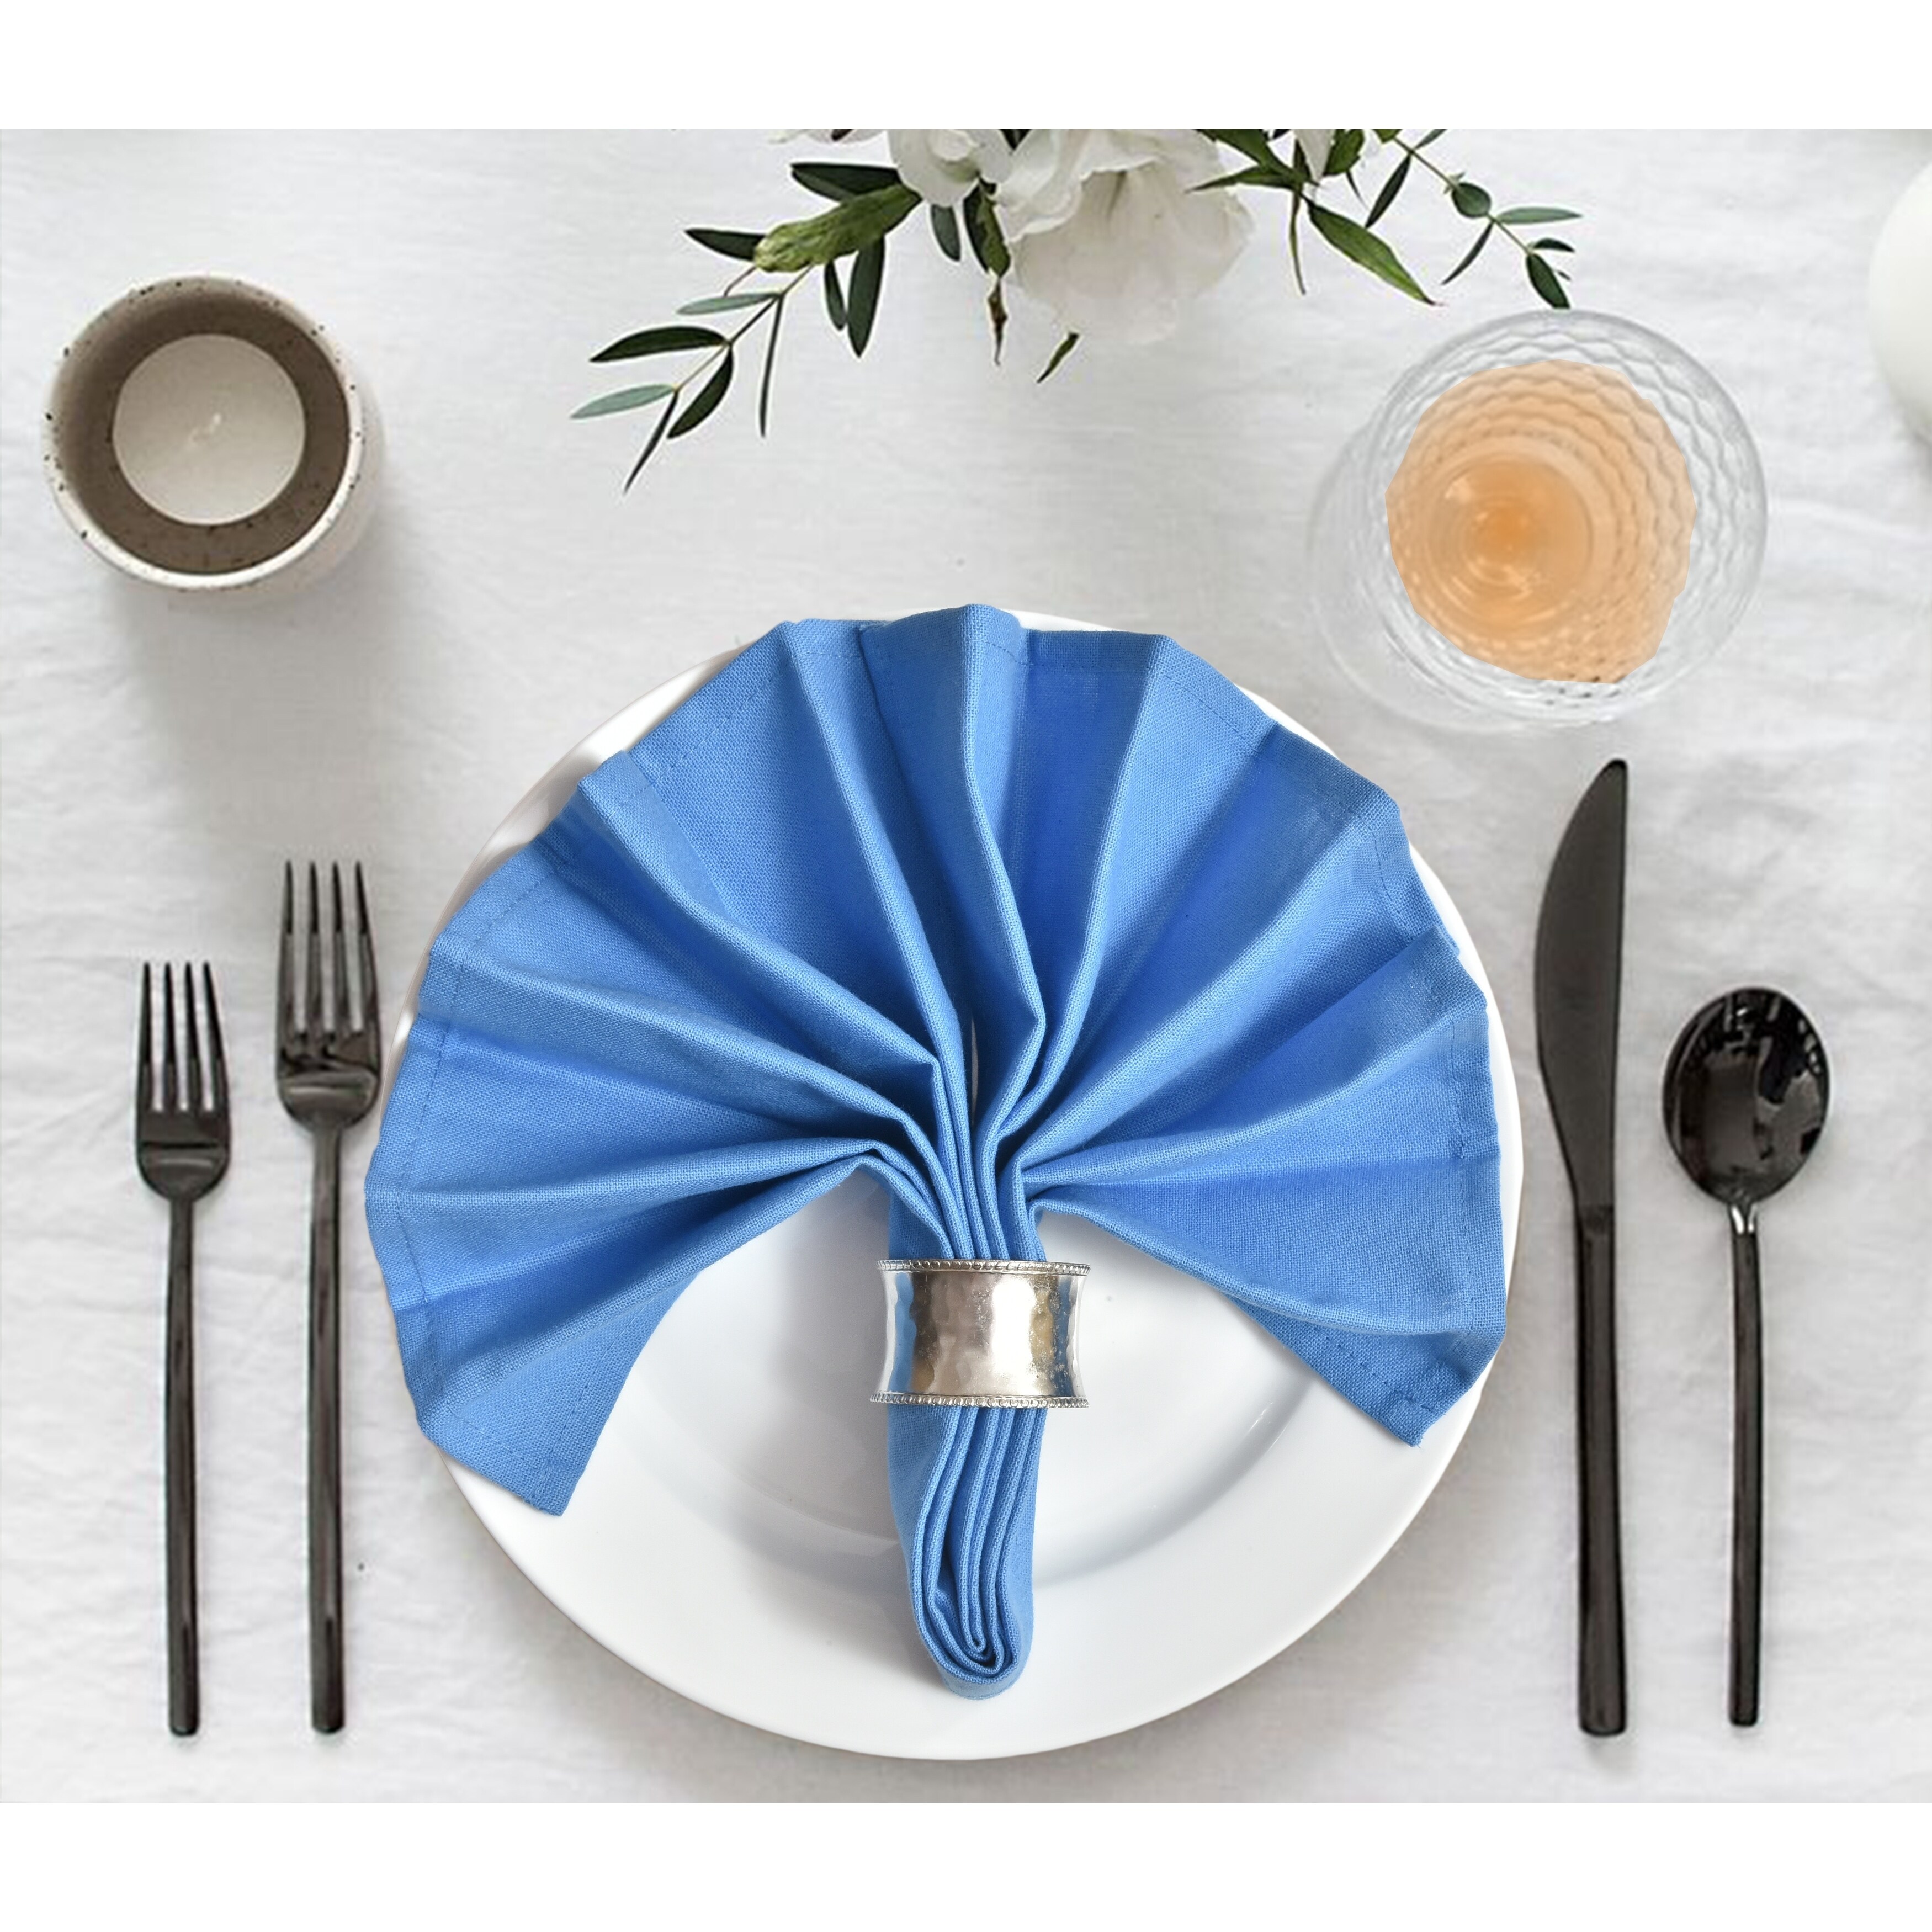 for Dinners,Weddings,Cocktail Parties /& Home Use Navy Blue Soft,Comfortable /&Reusable Cotton Napkins MZXcuin Cloth Napkins 12 Pack 18 X 18 Inches 100/% Cotton